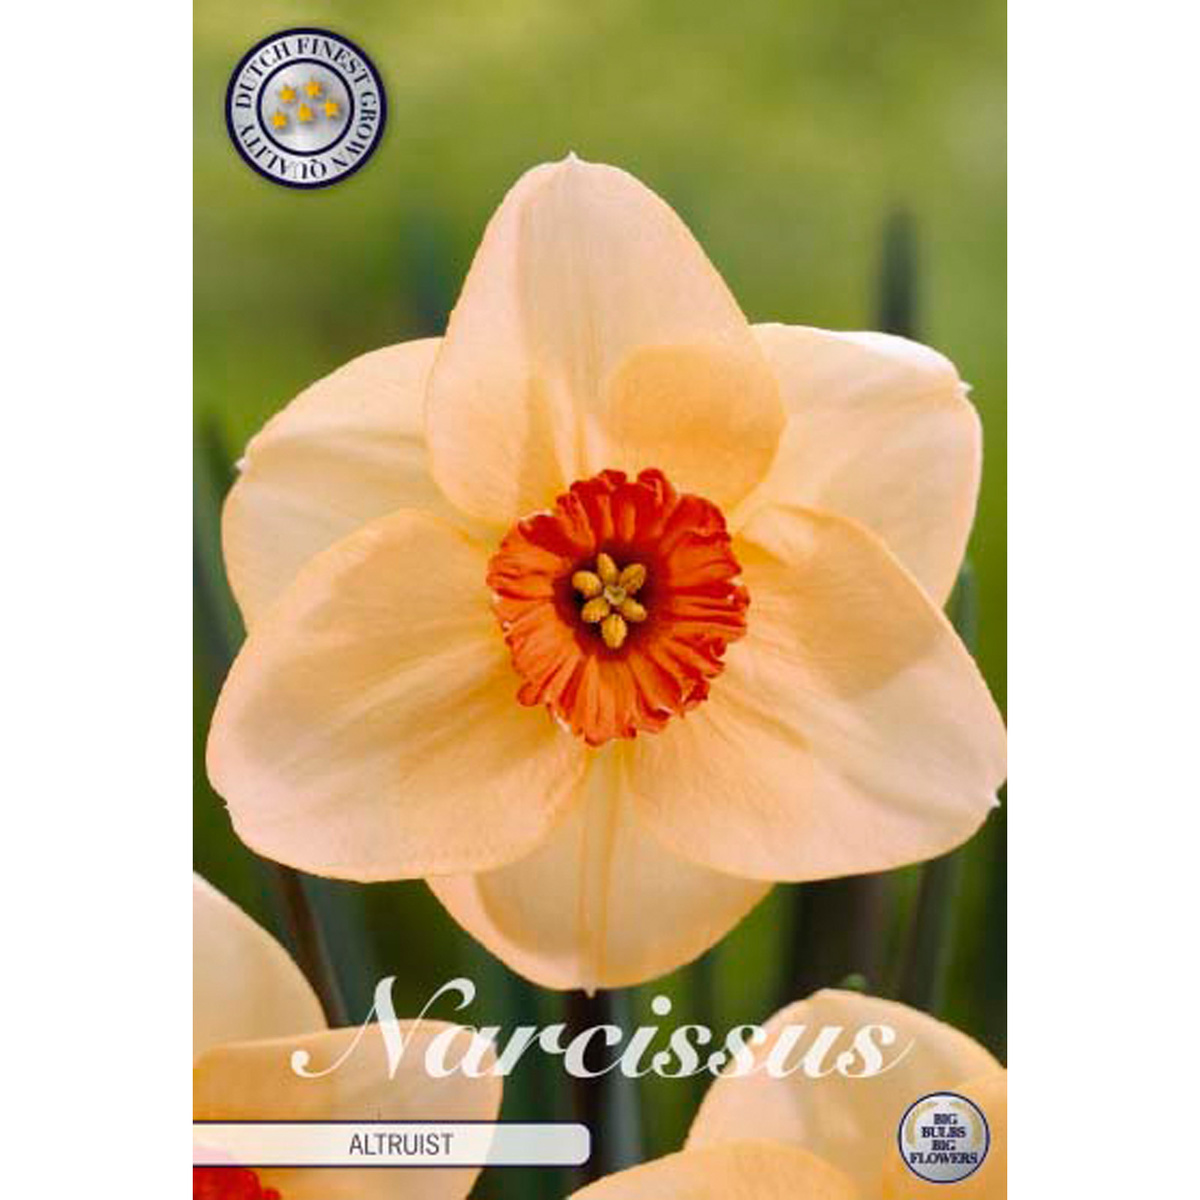 Narcissus Large Cupped Altruist 5 st